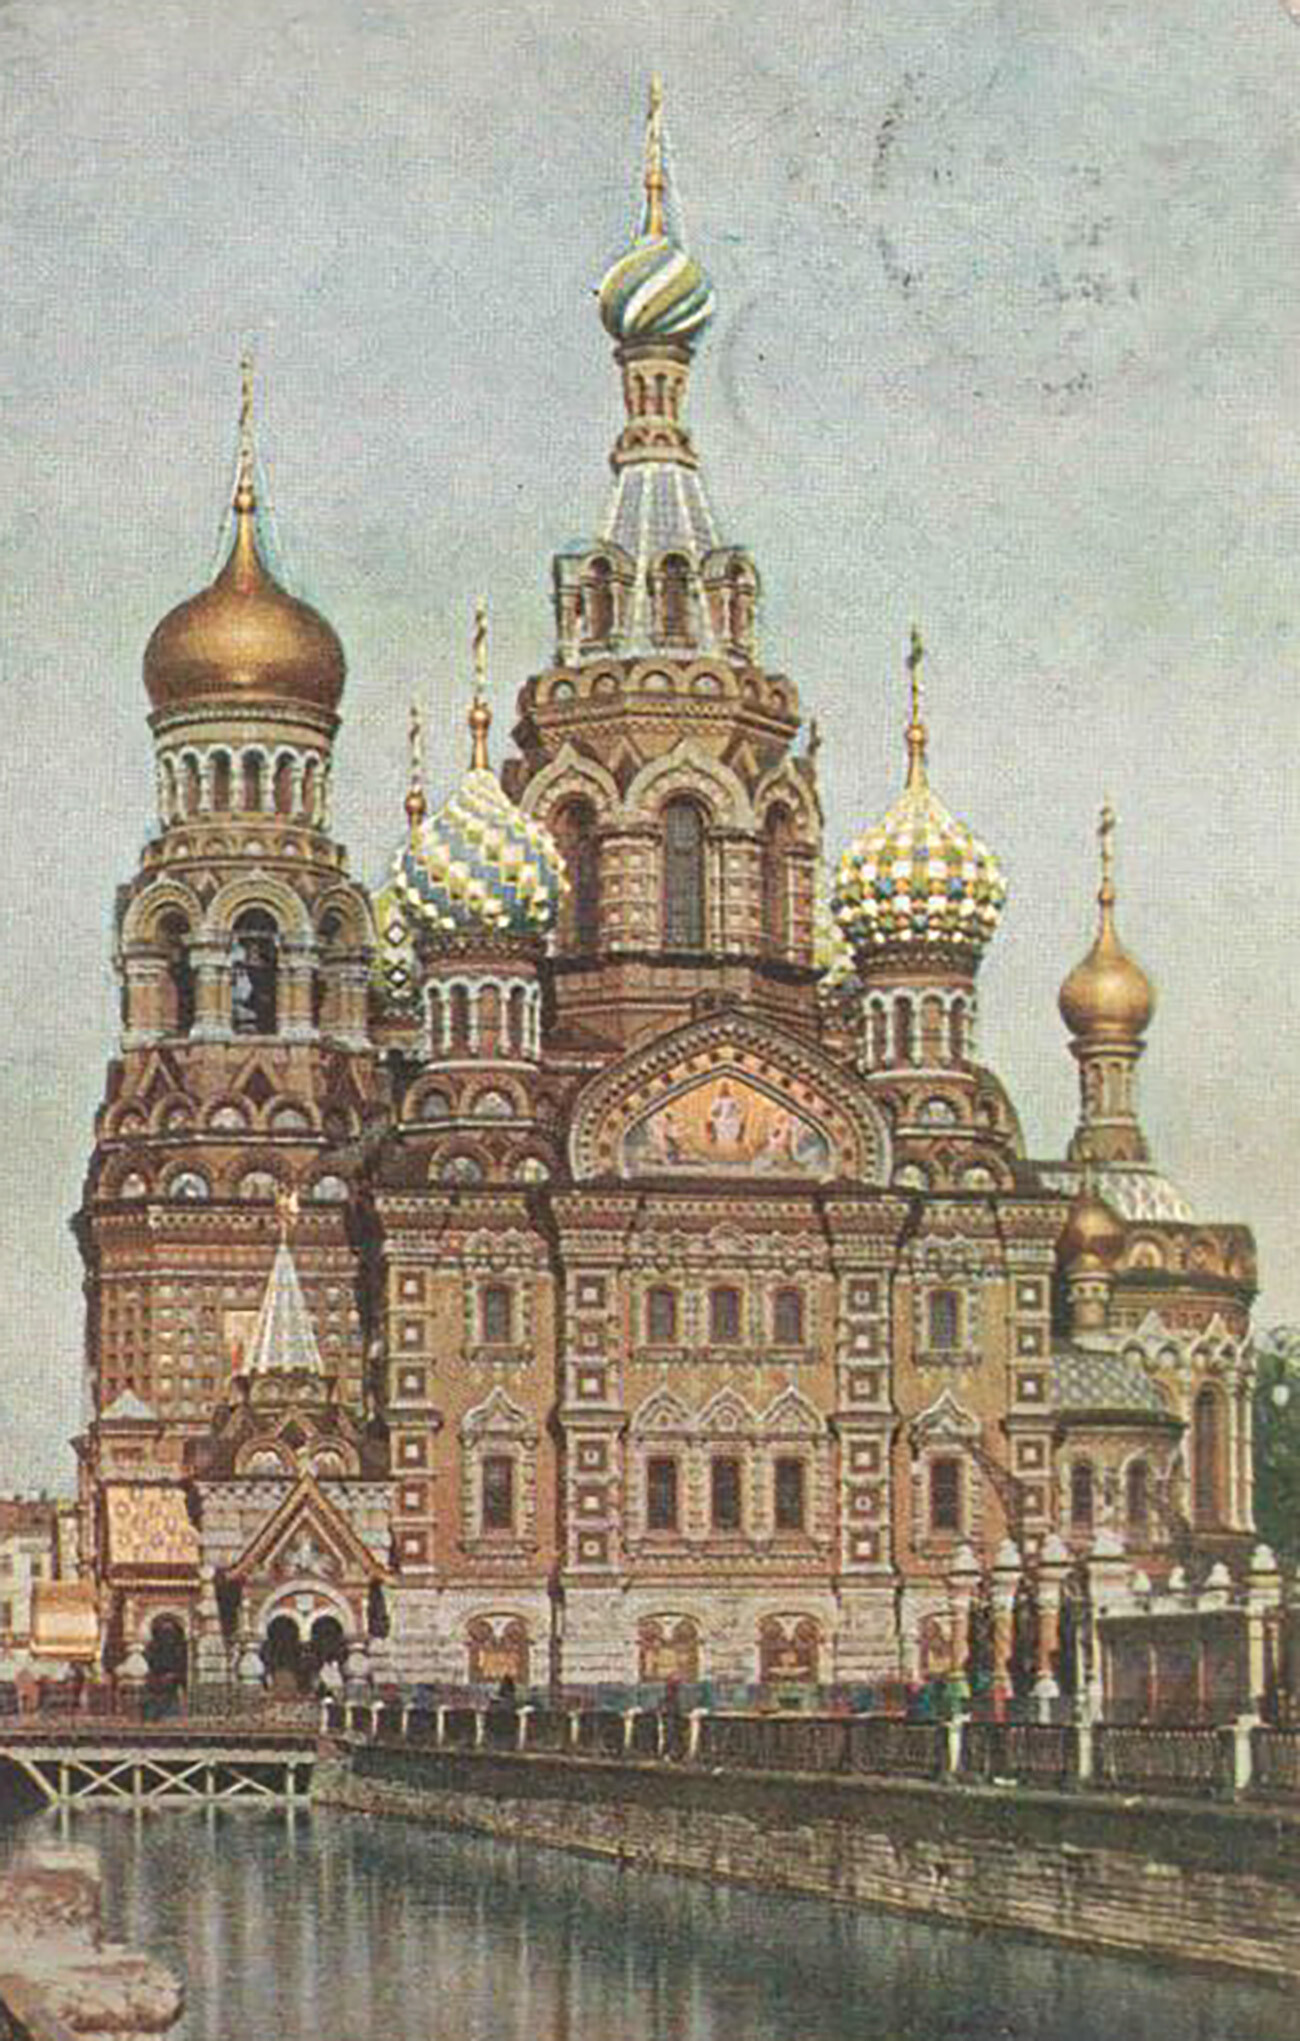 St. Petersburg. Cathedral of Resurrection of Savior on the Blood. South view from Catherine Canal. Circa 1907